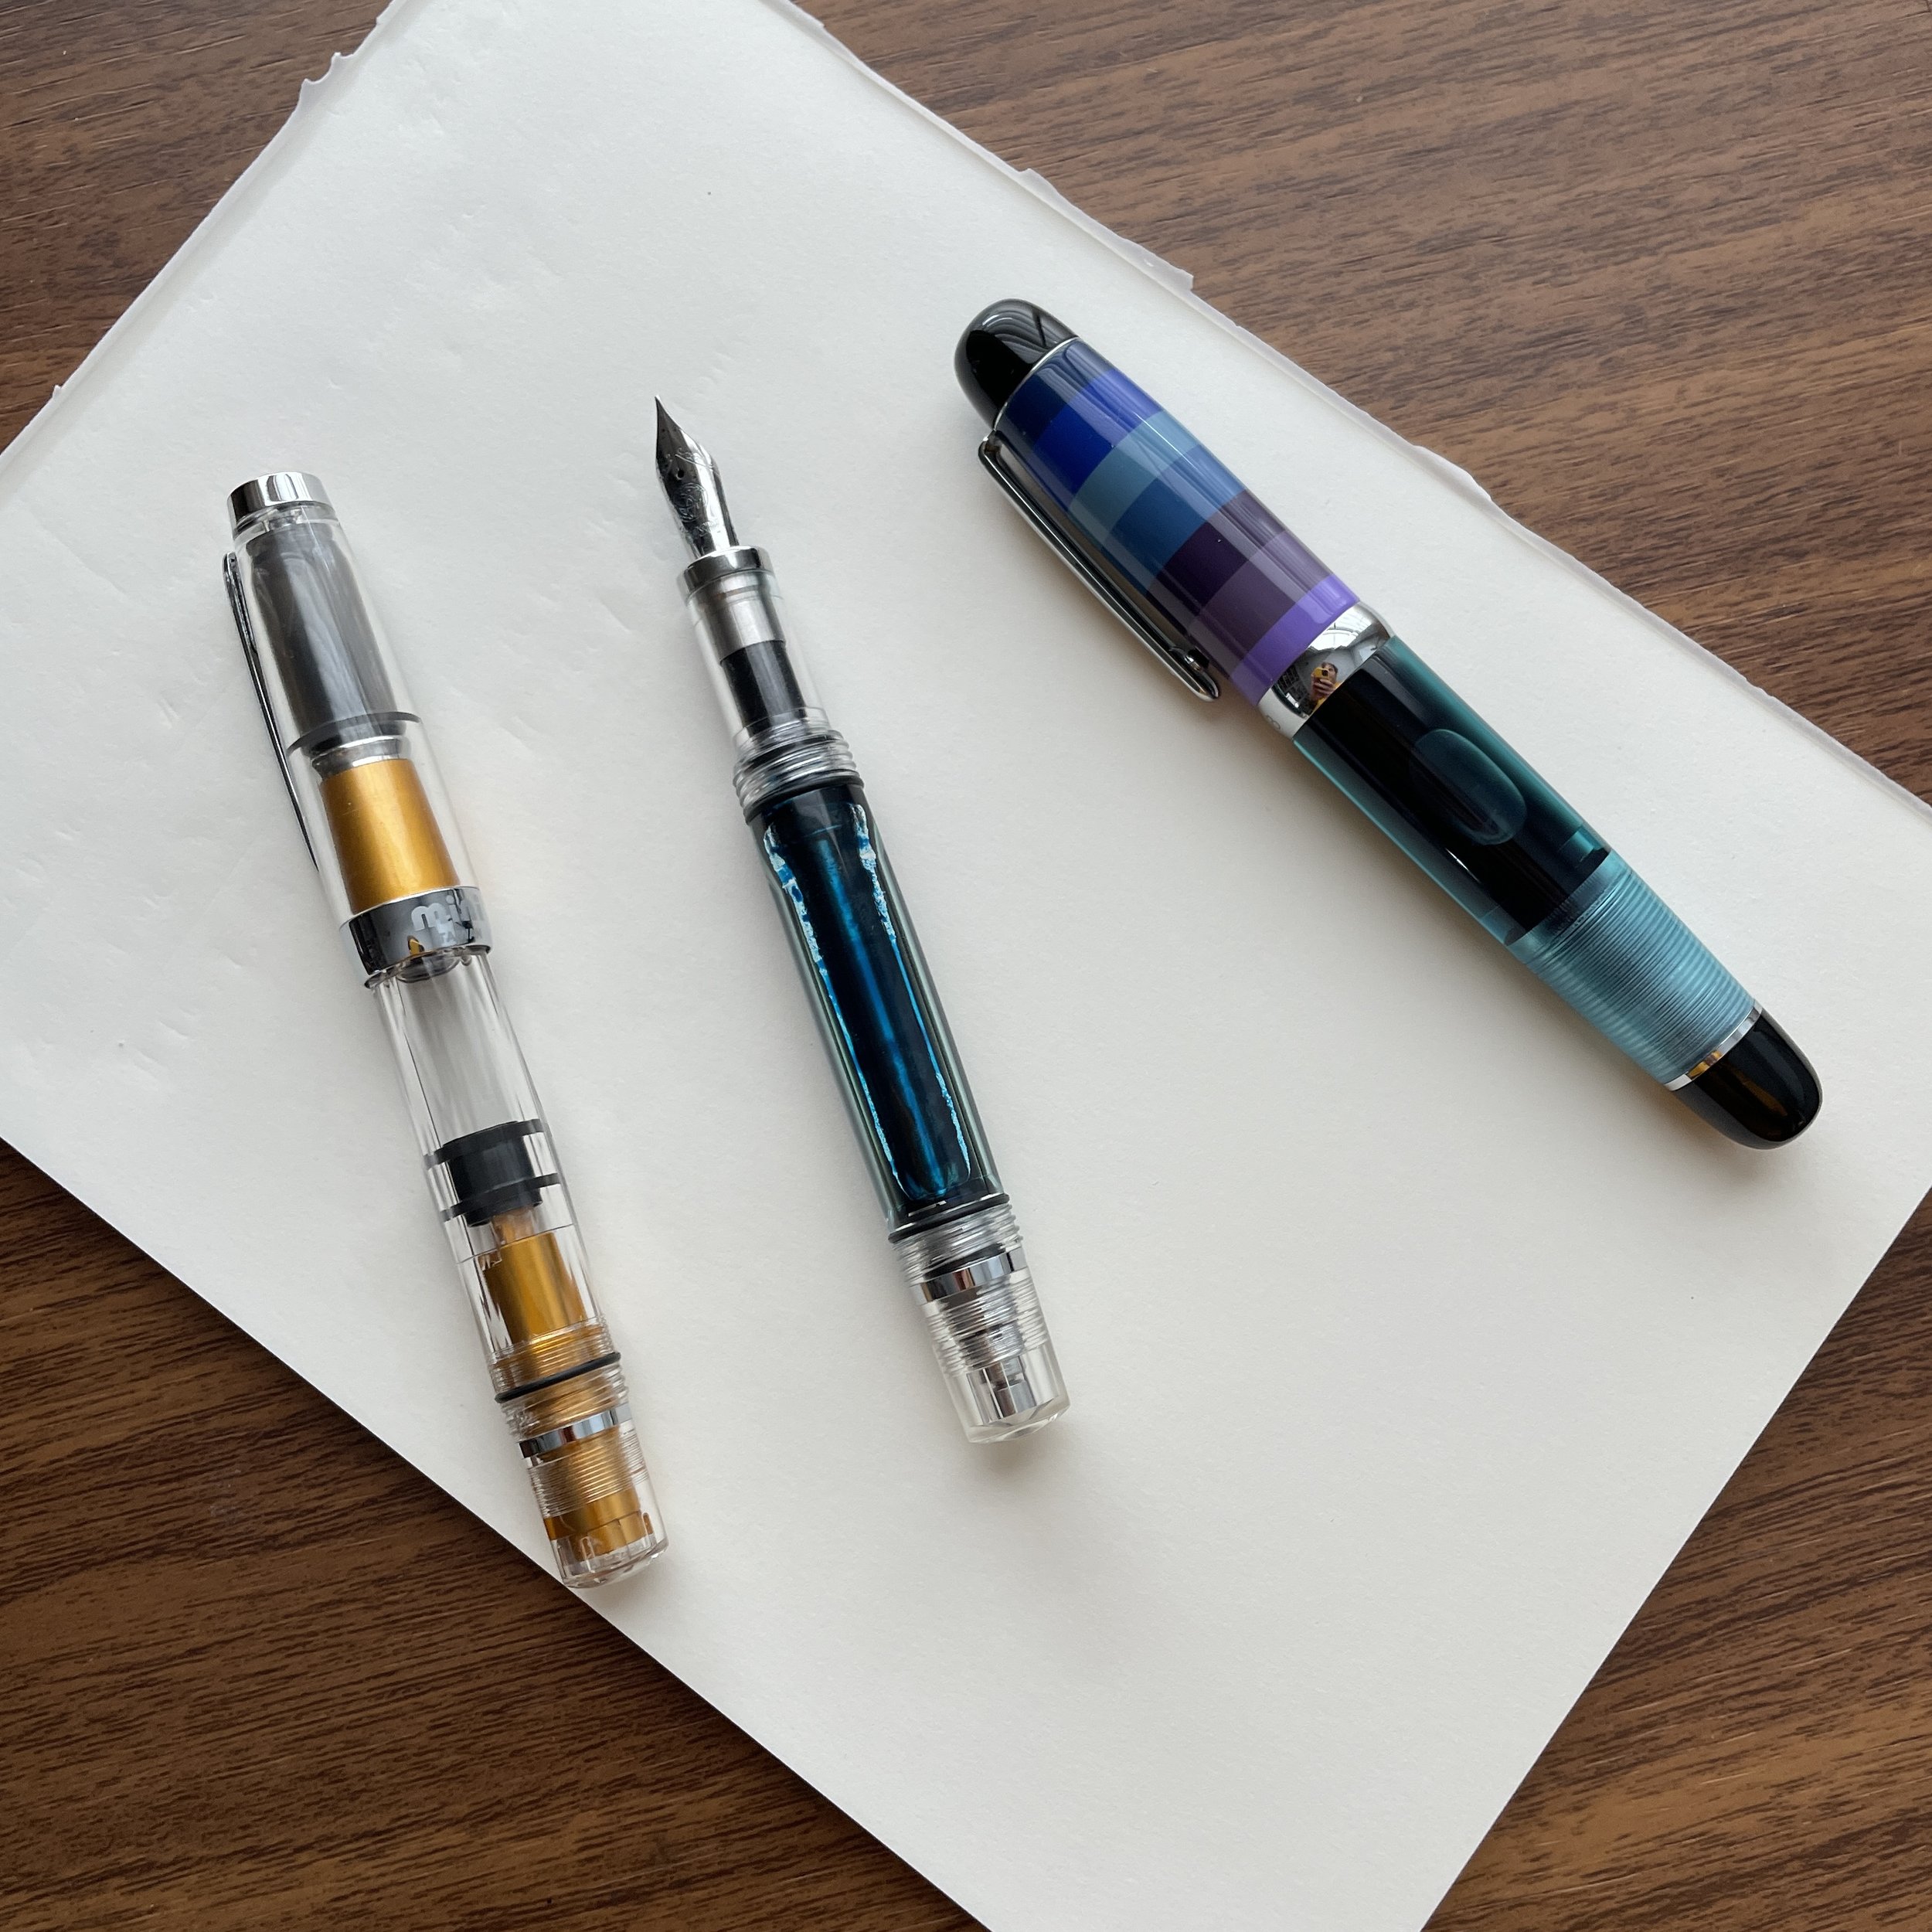 The Best Japanese Pens For Planning